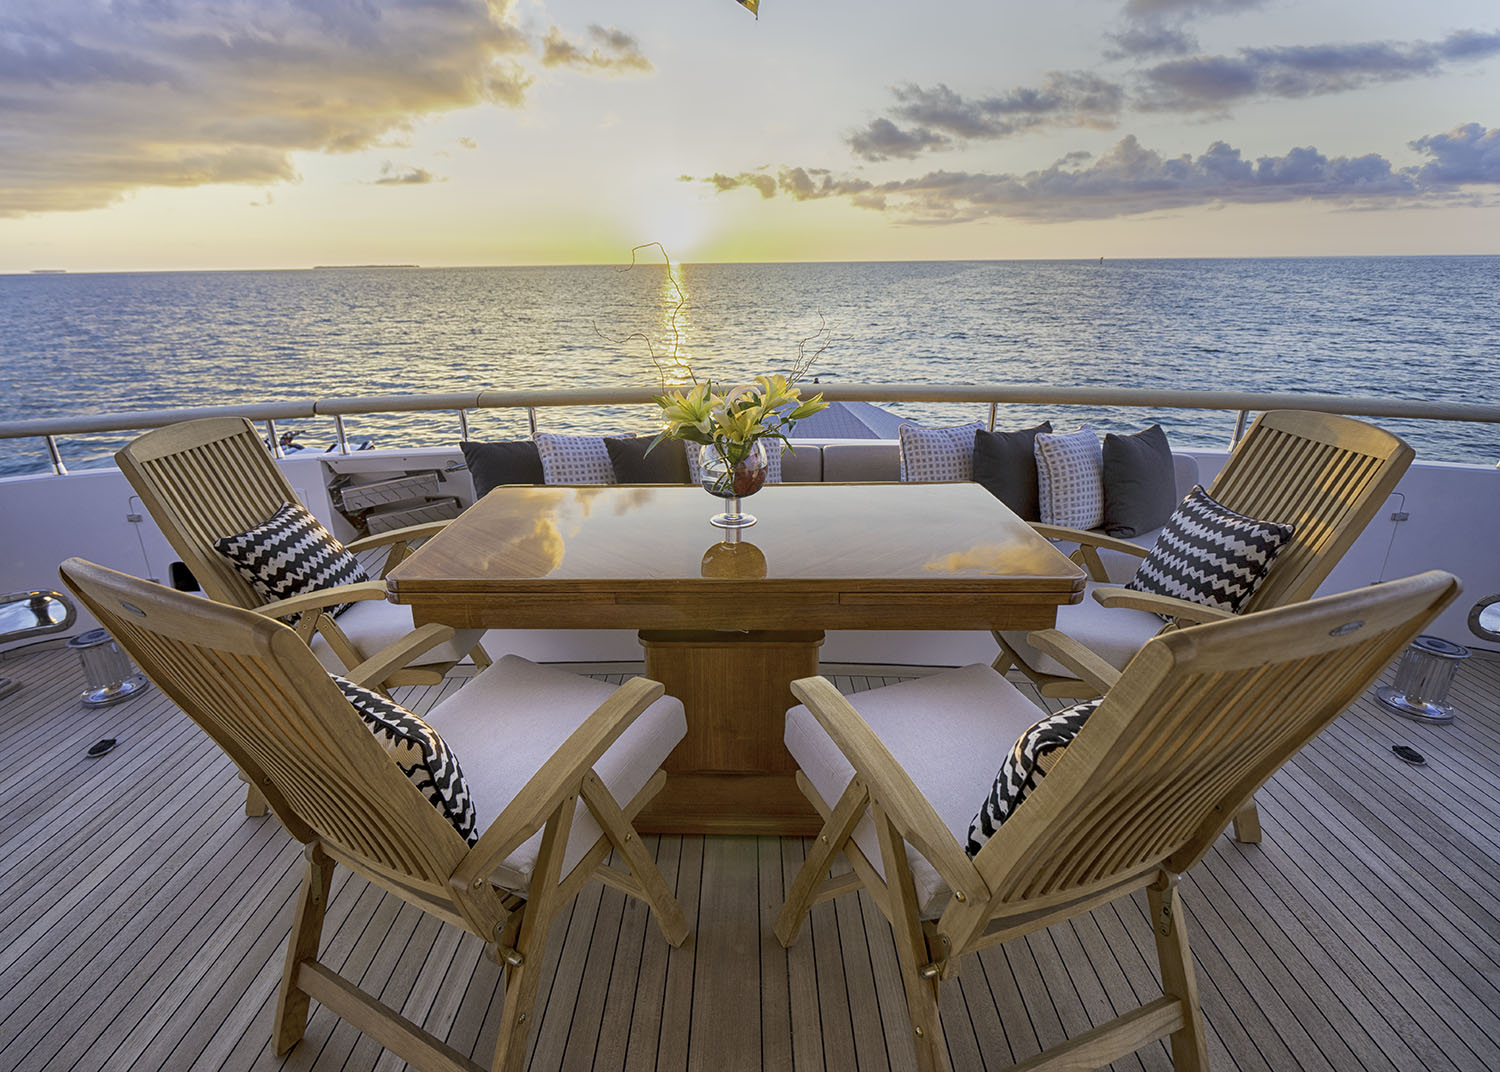 Aft deck table